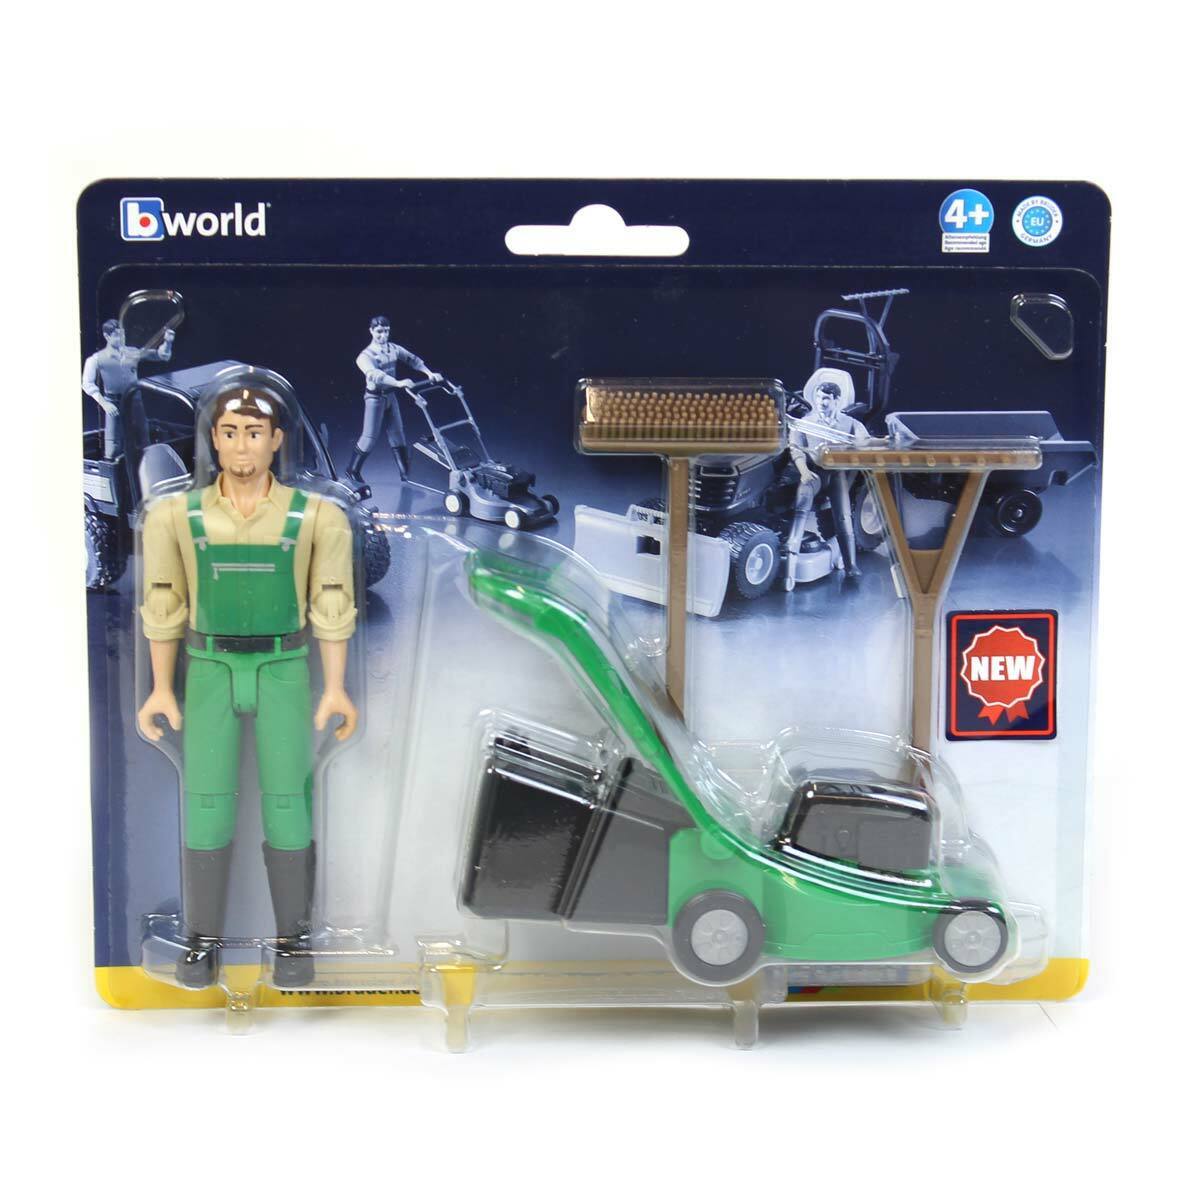 Bruder 62103 Gardener with Lawn Mower and Accessories